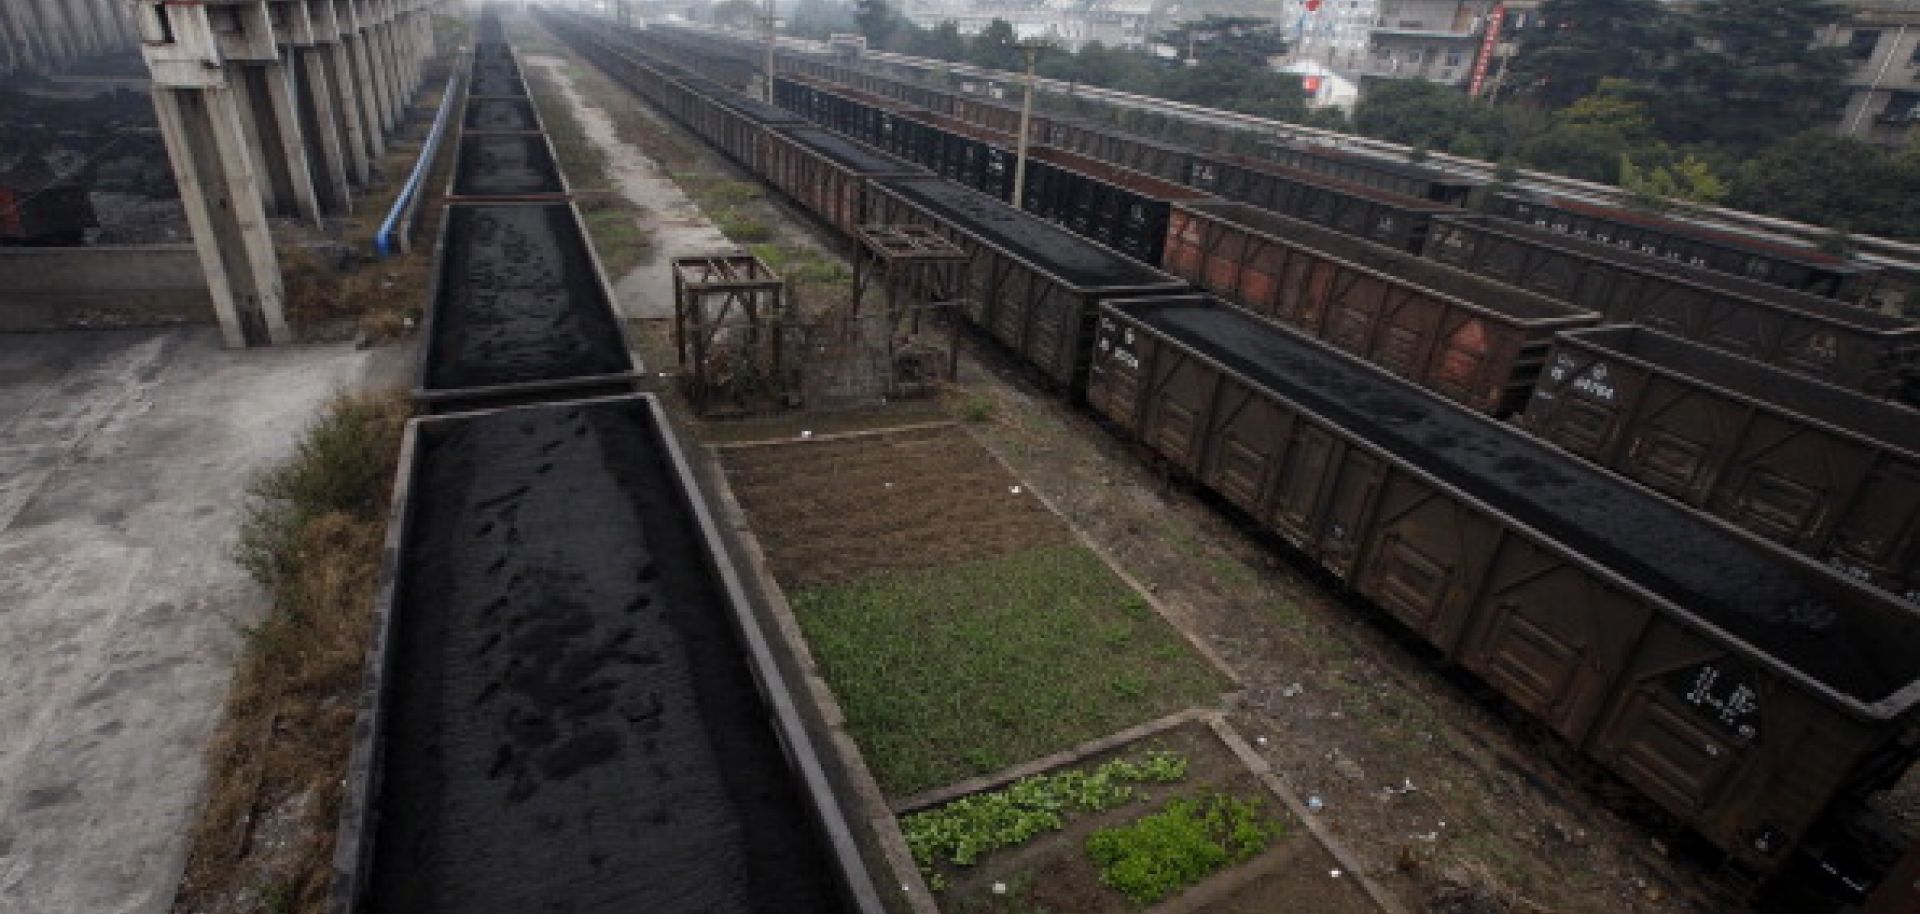 Trains carry coal in China's Anhui province in November 2011